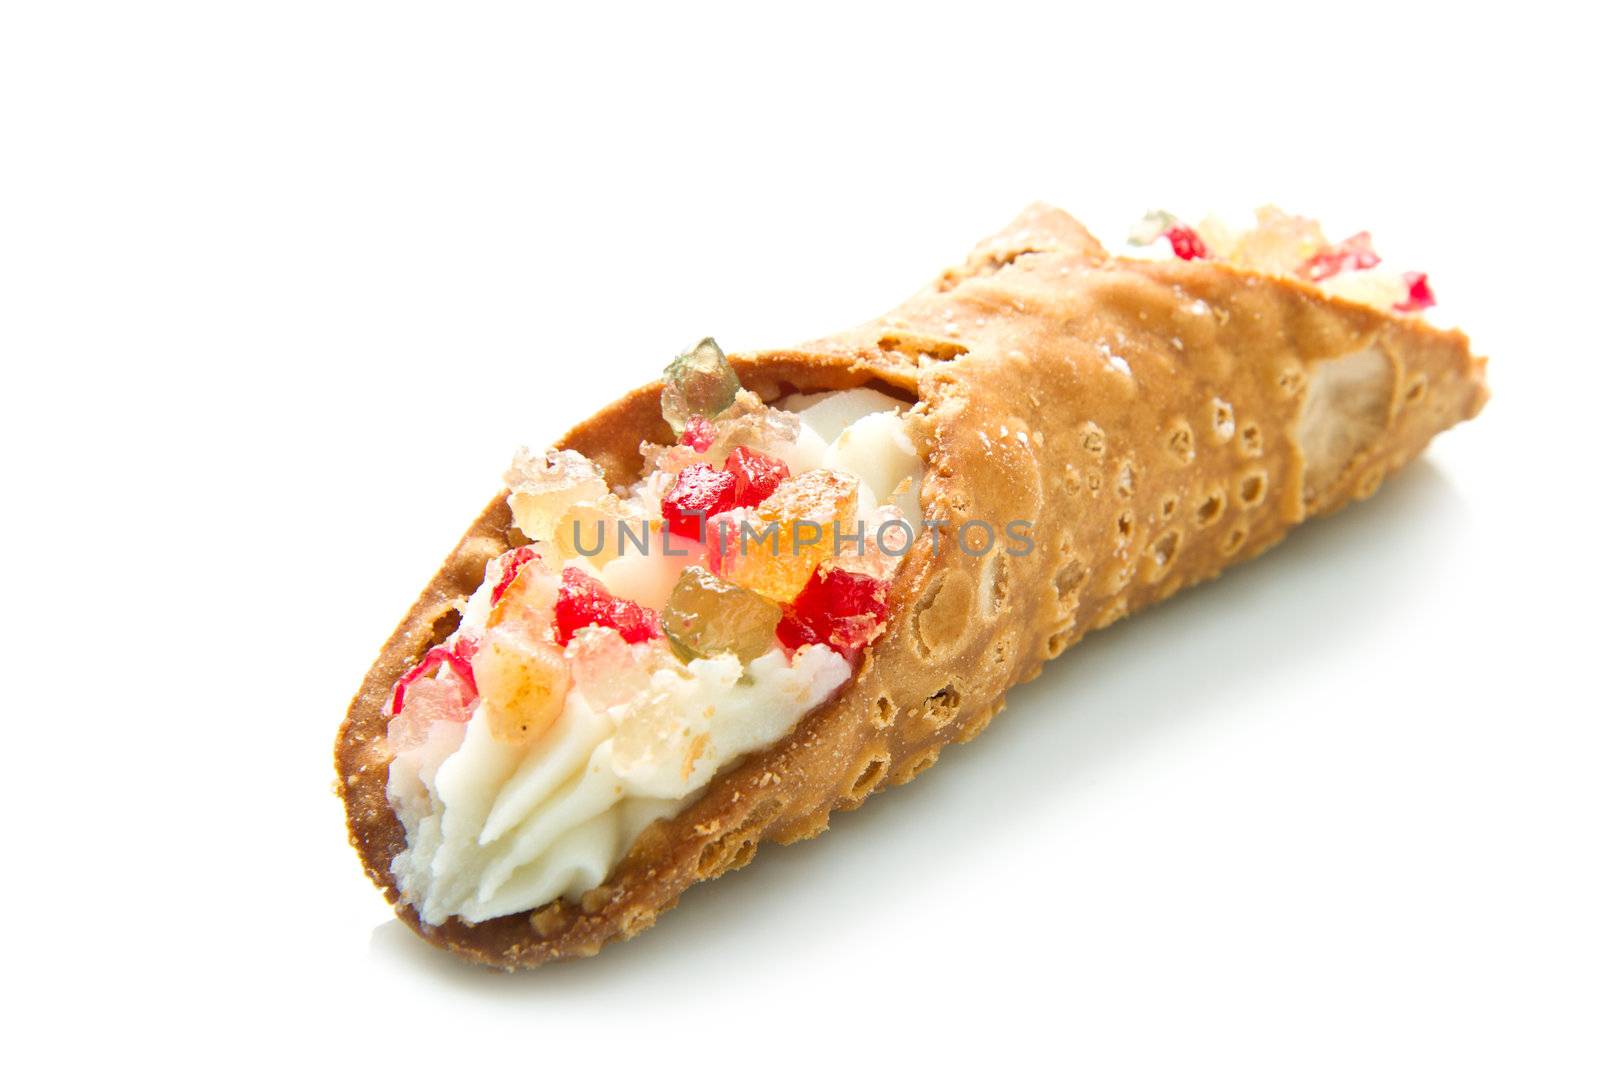 Sicilian cannoli with candied fruit by lsantilli